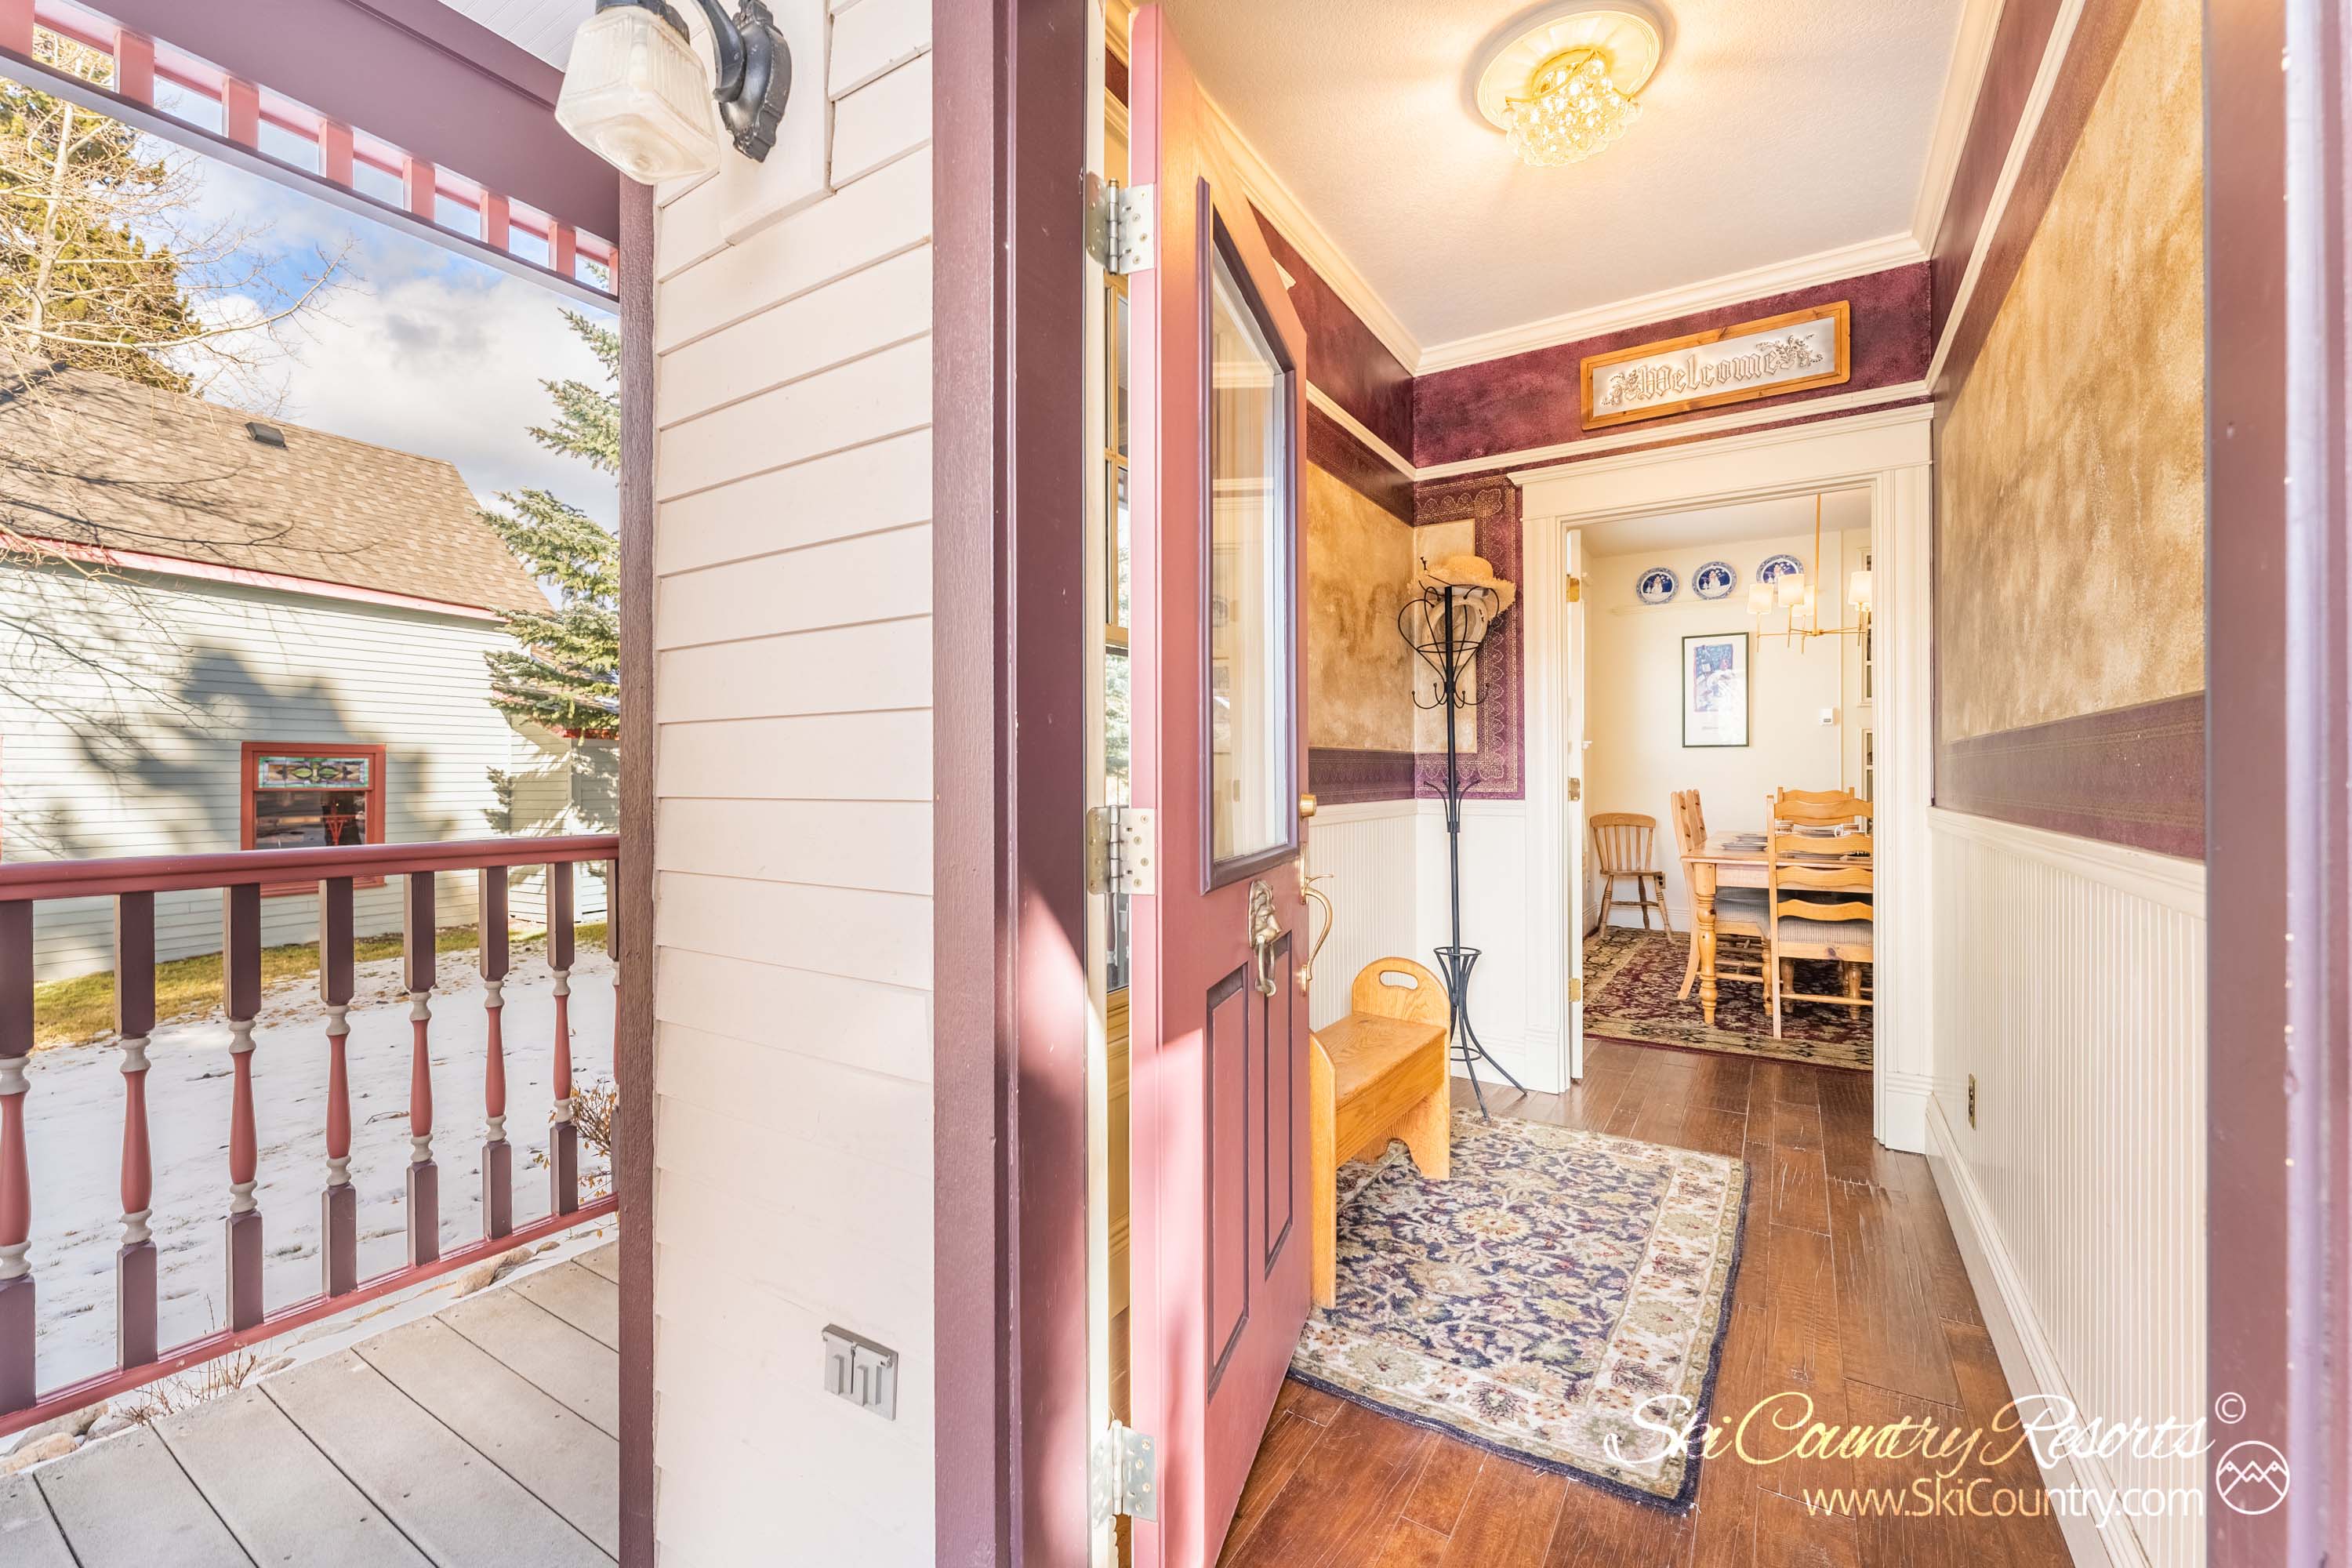 Step inside this enchanting Victorian abode, brimming with timeless charm and warmth. Your perfect retreat awaits. 